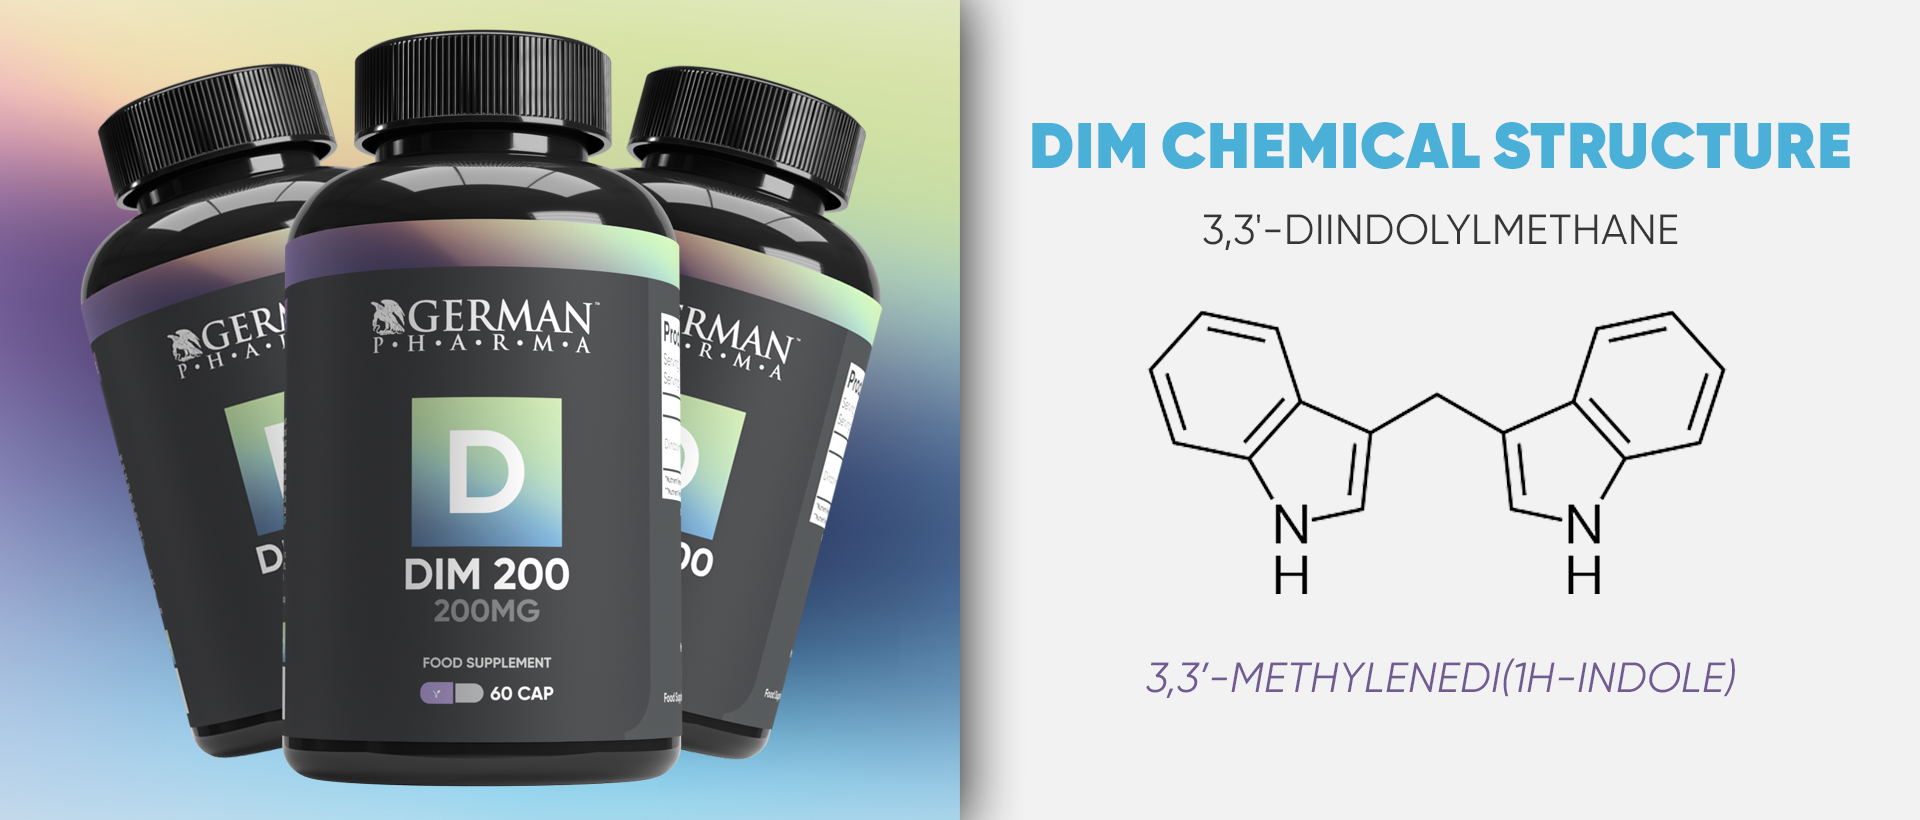 Dim Chemical Structure